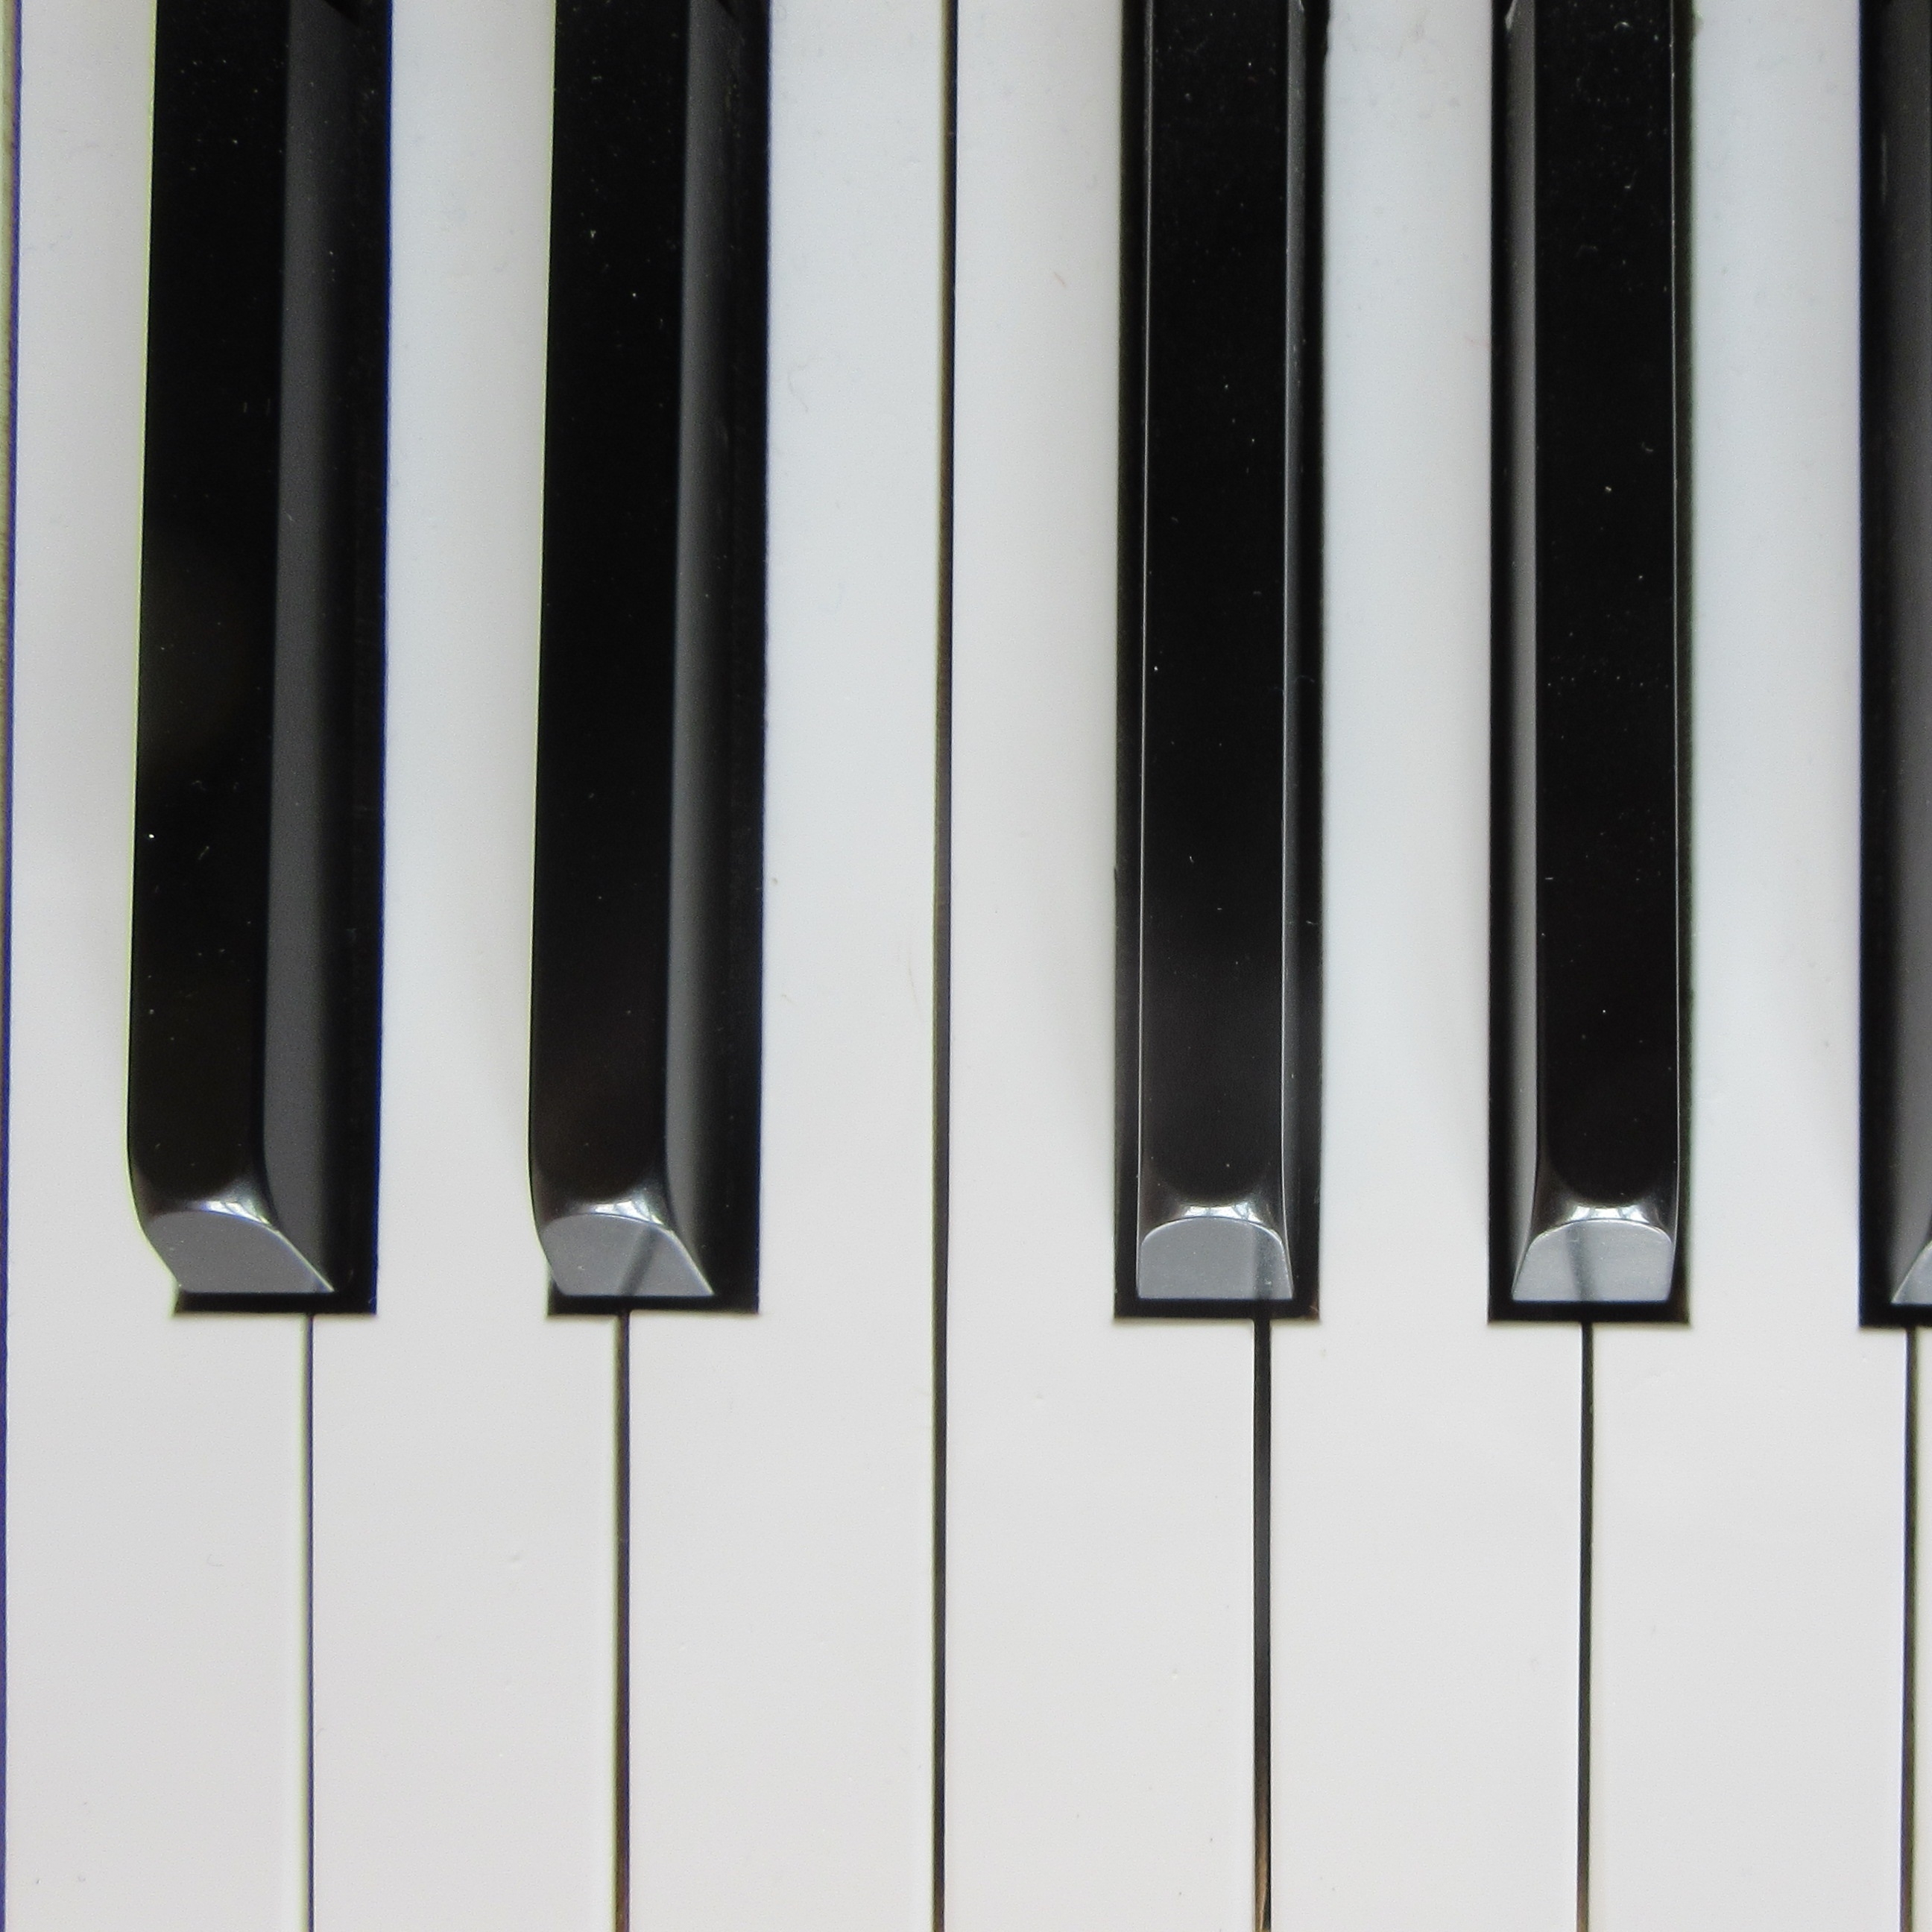 The Best 20 Piano Pieces - Powerful Sounds for Complete, Absolute and Powerful Stress Relief